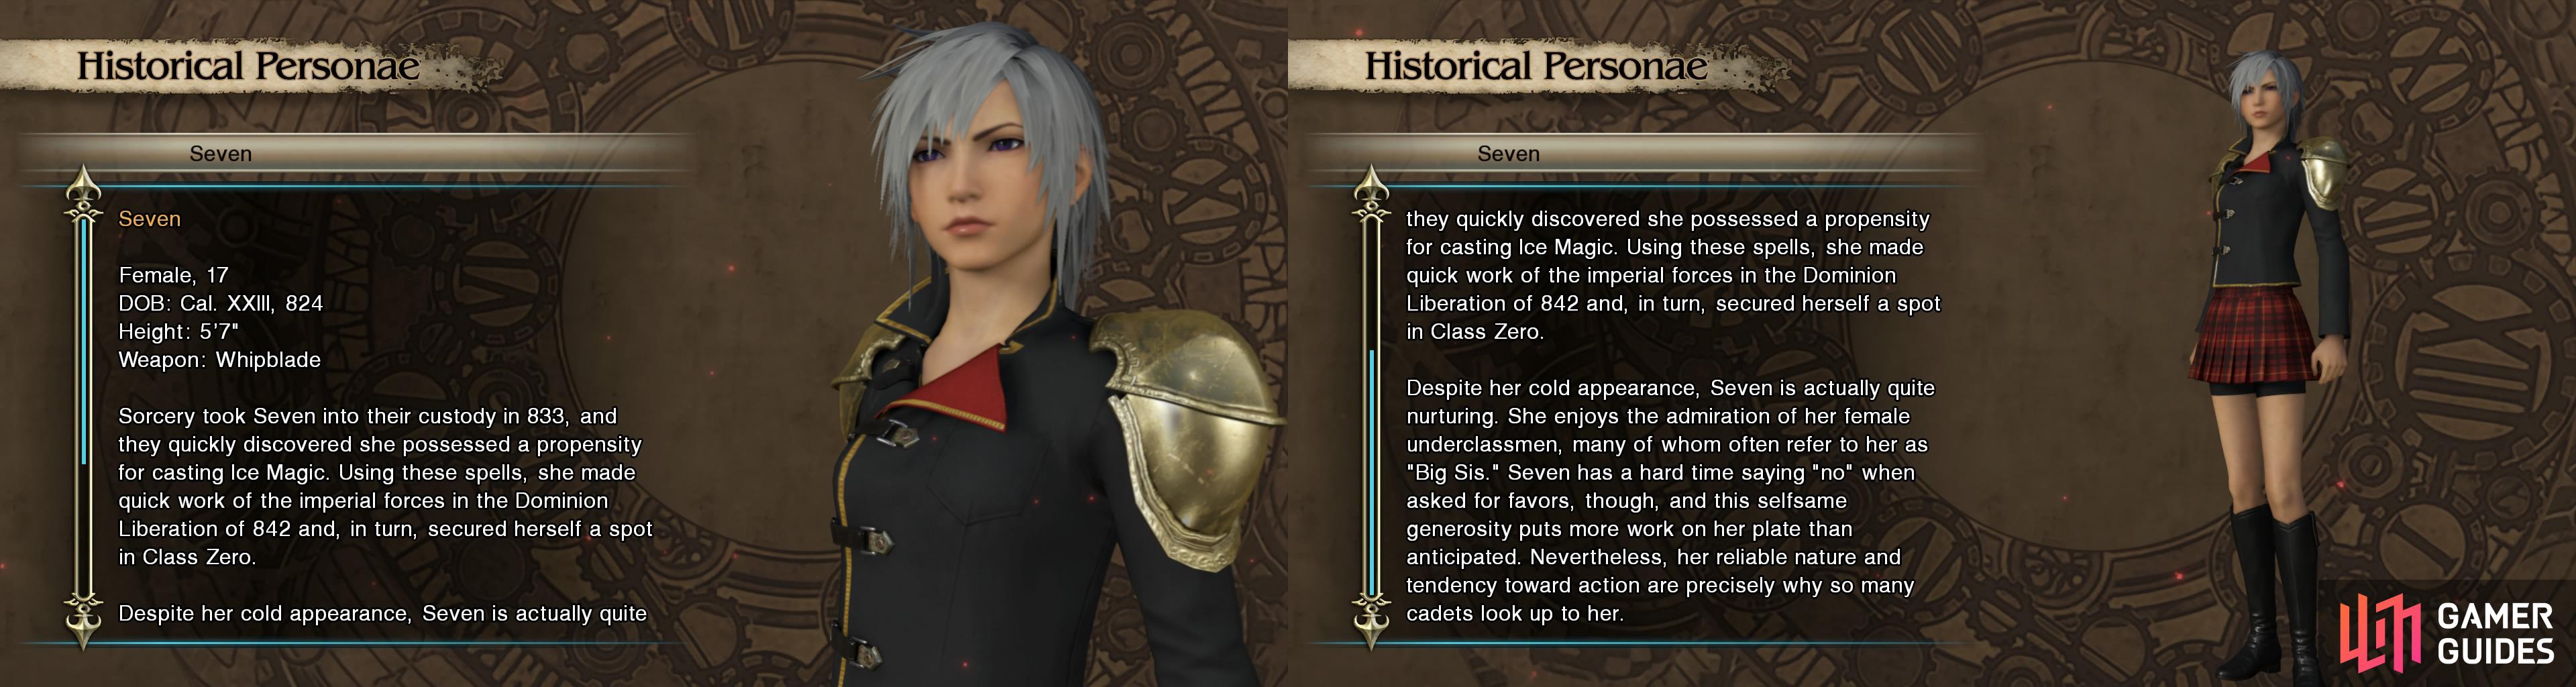 Seven is reserved around strangers but has a caring and loyalty for those closest to her that has earned her a reputation as the big sister of Class Zero.